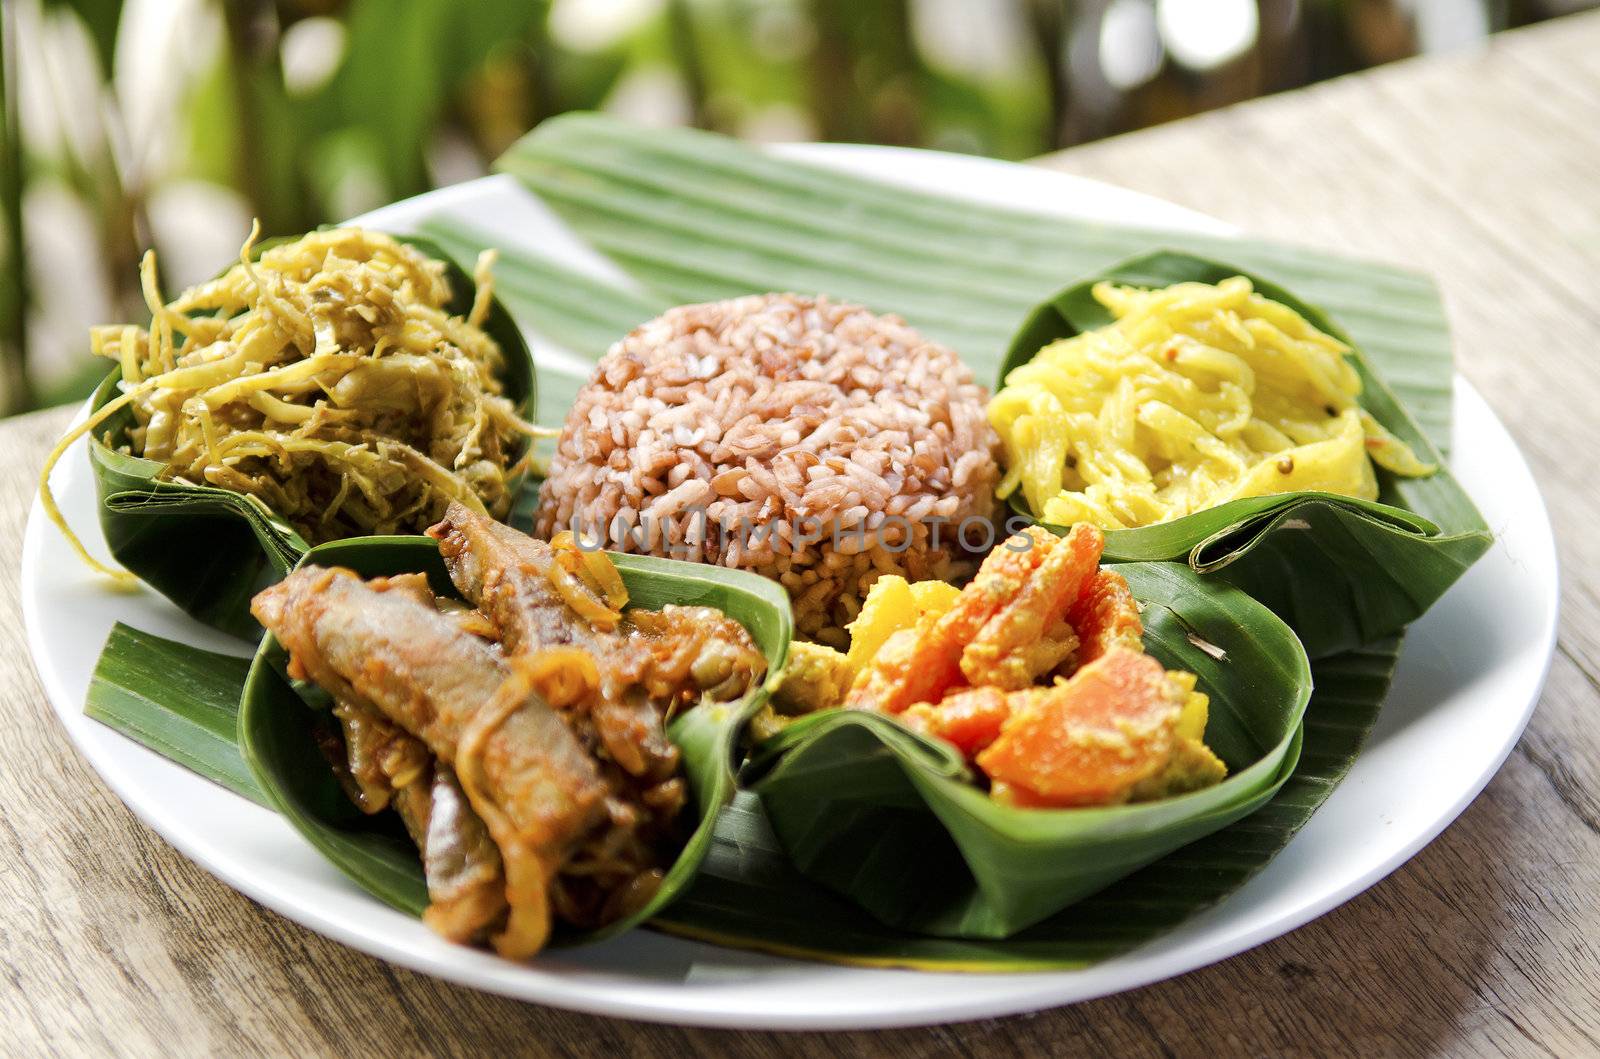 indonesian food in bali, several curries and rice